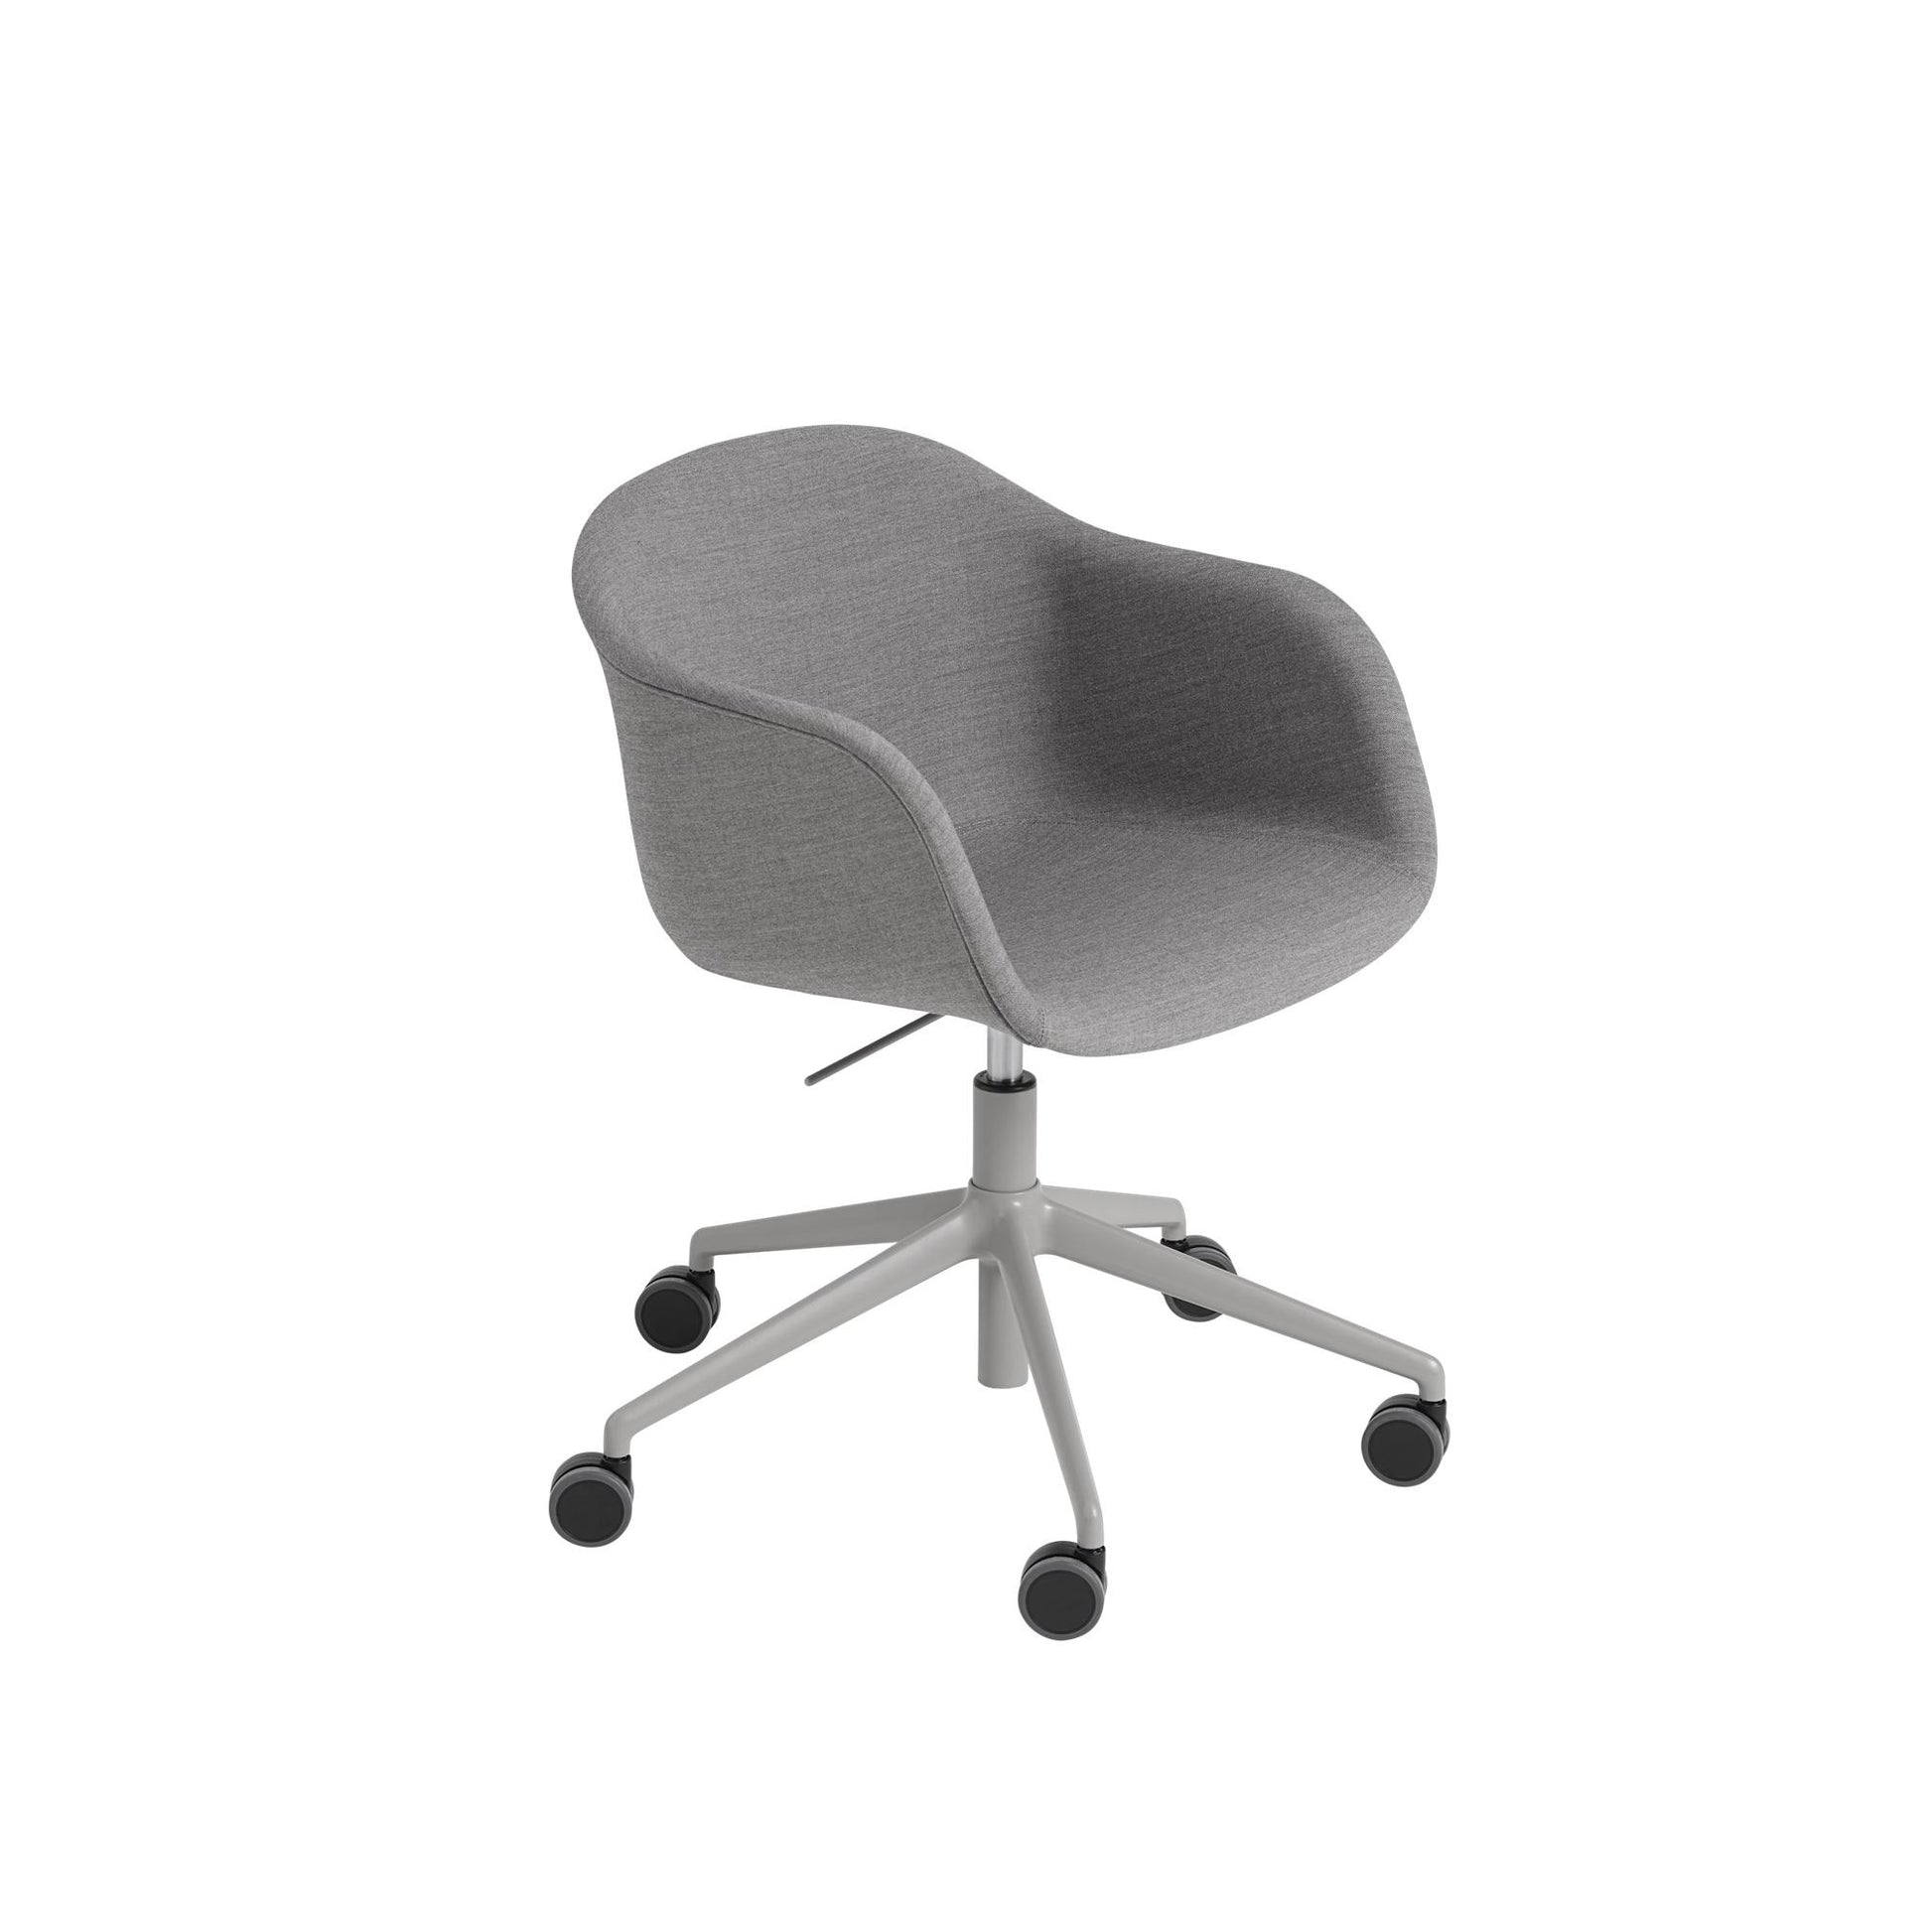 Fiber Dining Chair w. Armrest Swivel Base and Wheel by Muuto #Upholstered Remix 133/Gray